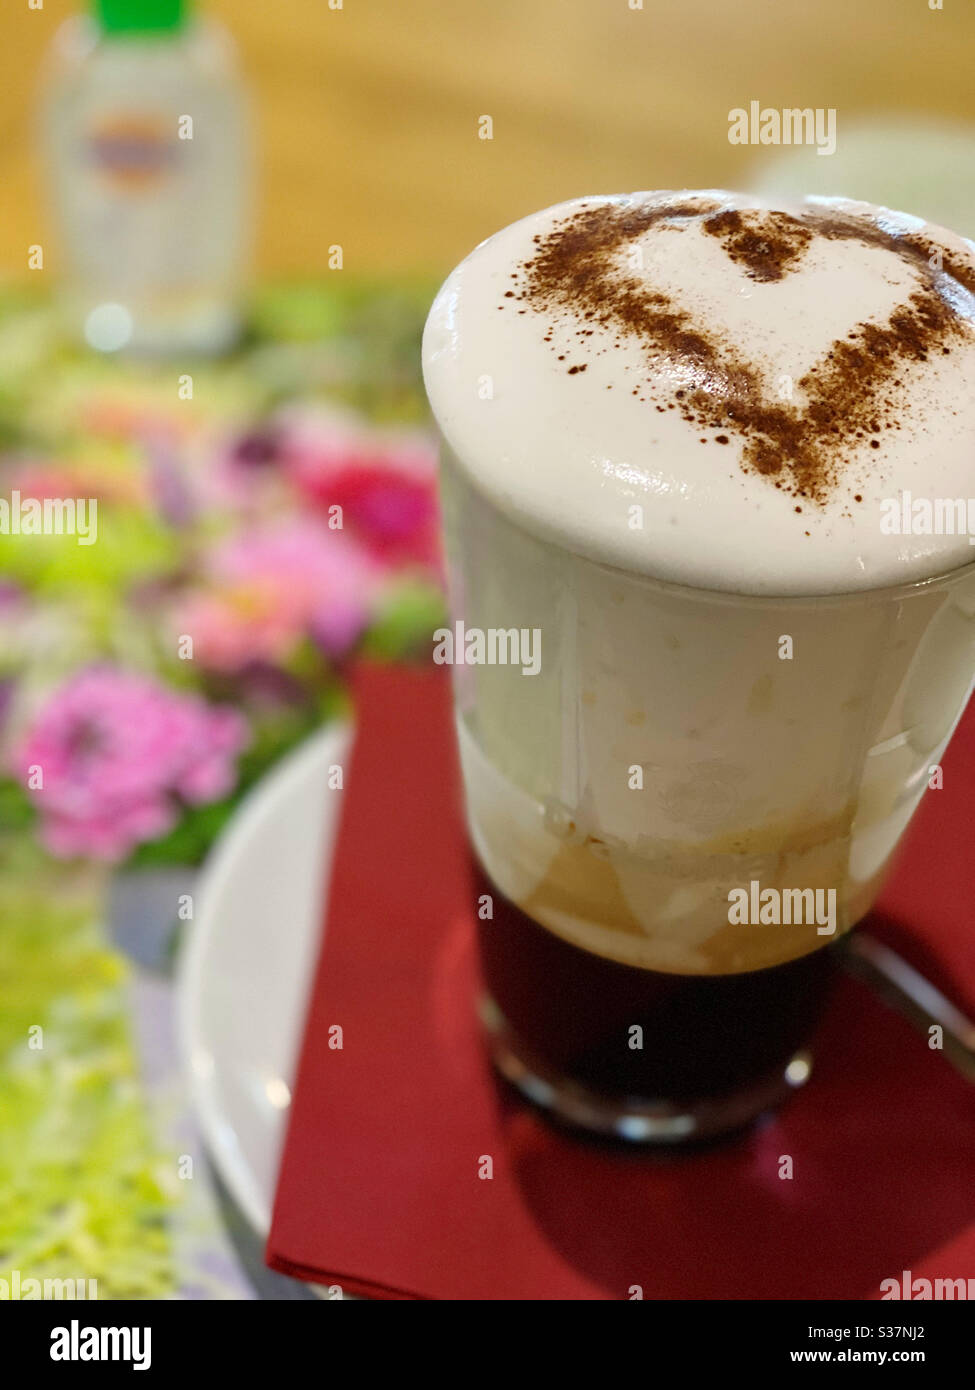 Coffee with heart and Desinfection. Stock Photo